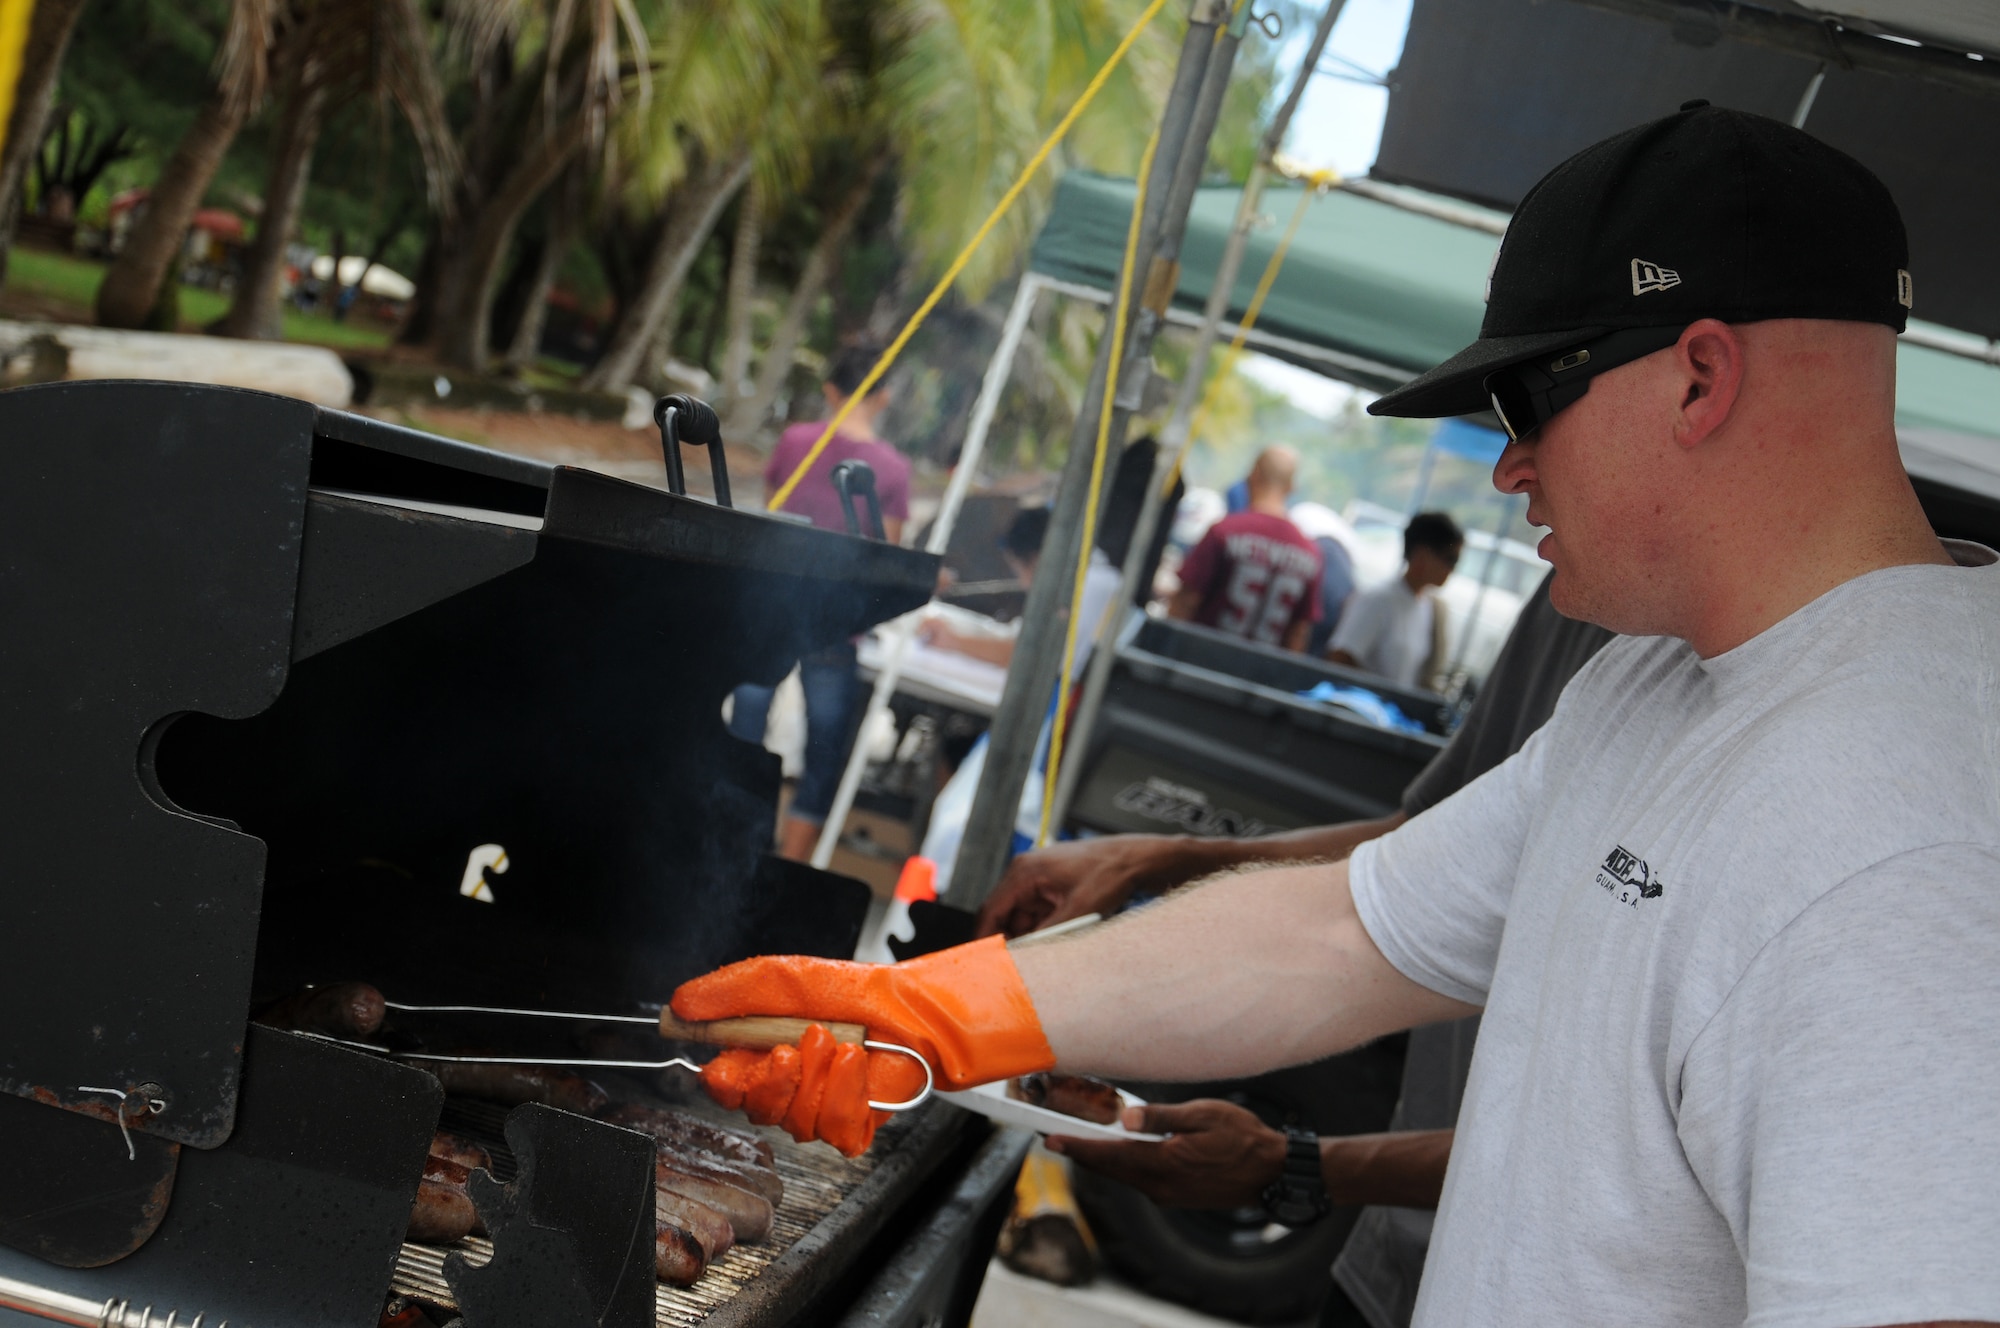 Staff Sgt. Phillip Cyb, 36th Security Forces Squadron confinement NCO in charge, grills bratwursts during the Freedom Fest July 5, 2013, on Andersen Air Force Base, Guam. More than 900 military members and their families attended the Freedom Fest at Tarague Beach in celebration of Independence Day. (U.S. Air Force photo by Staff Sgt. Melissa B. White/Released)